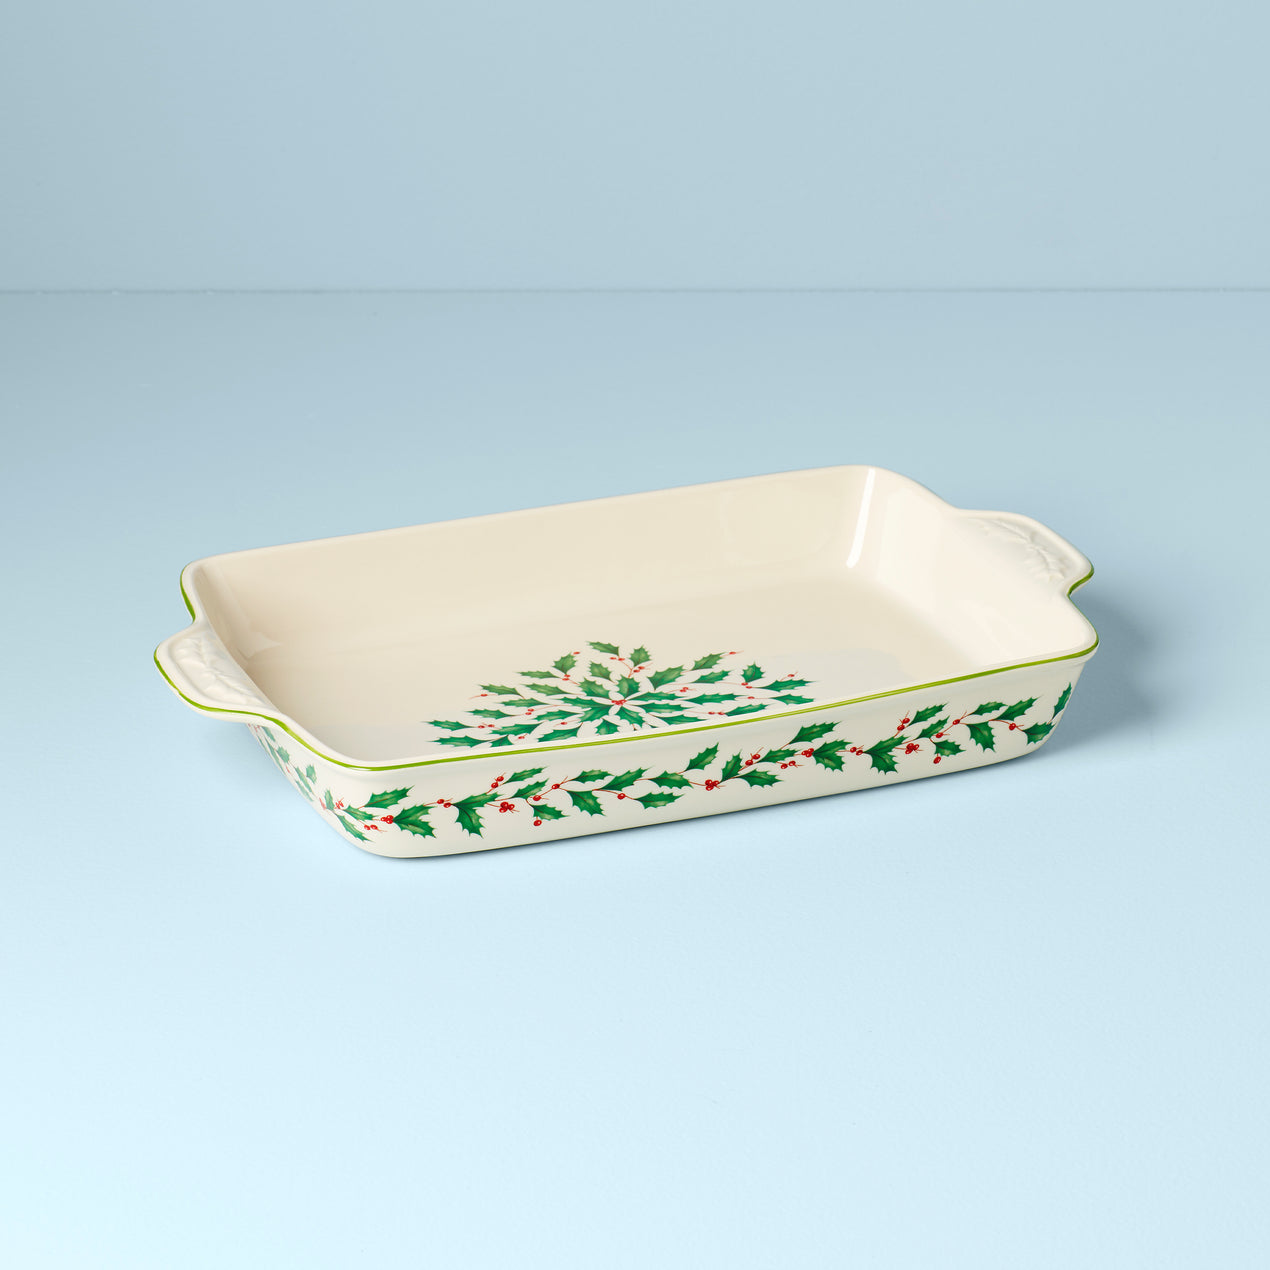 Bakers & Casserole Dish Collection, Baking